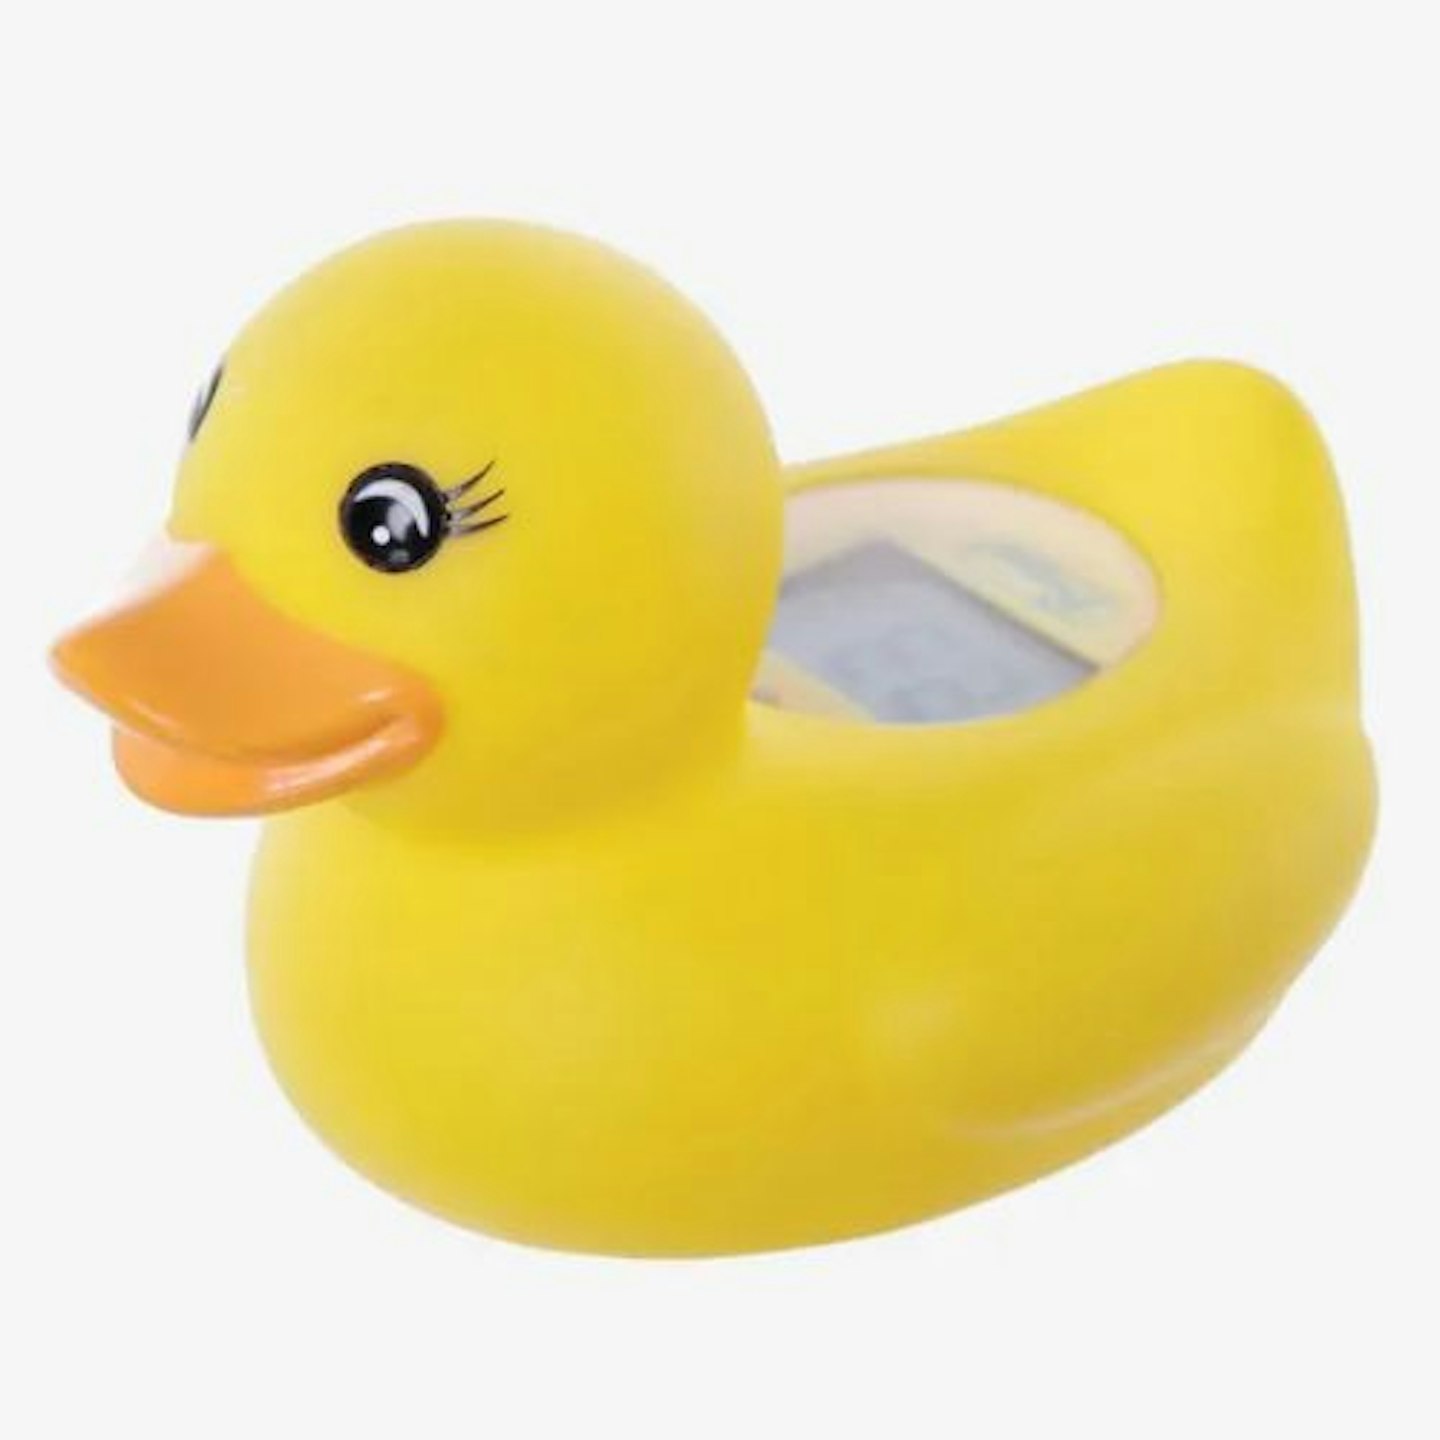 Dreambaby Digital Room & Bath 2-in-1 Duck Thermometer